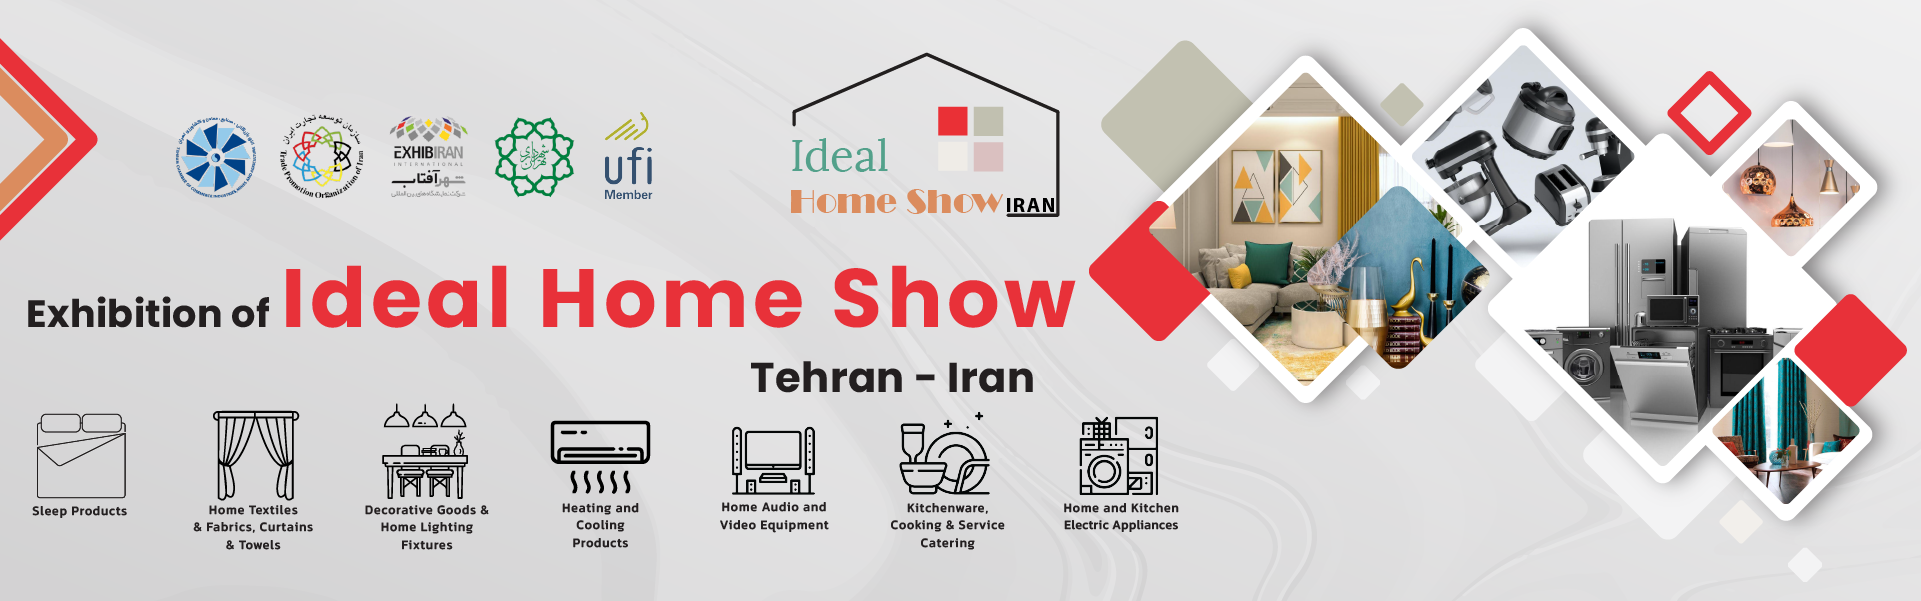 Iran household appliances exhibition (IRAN IDEAL HOME SHOW)